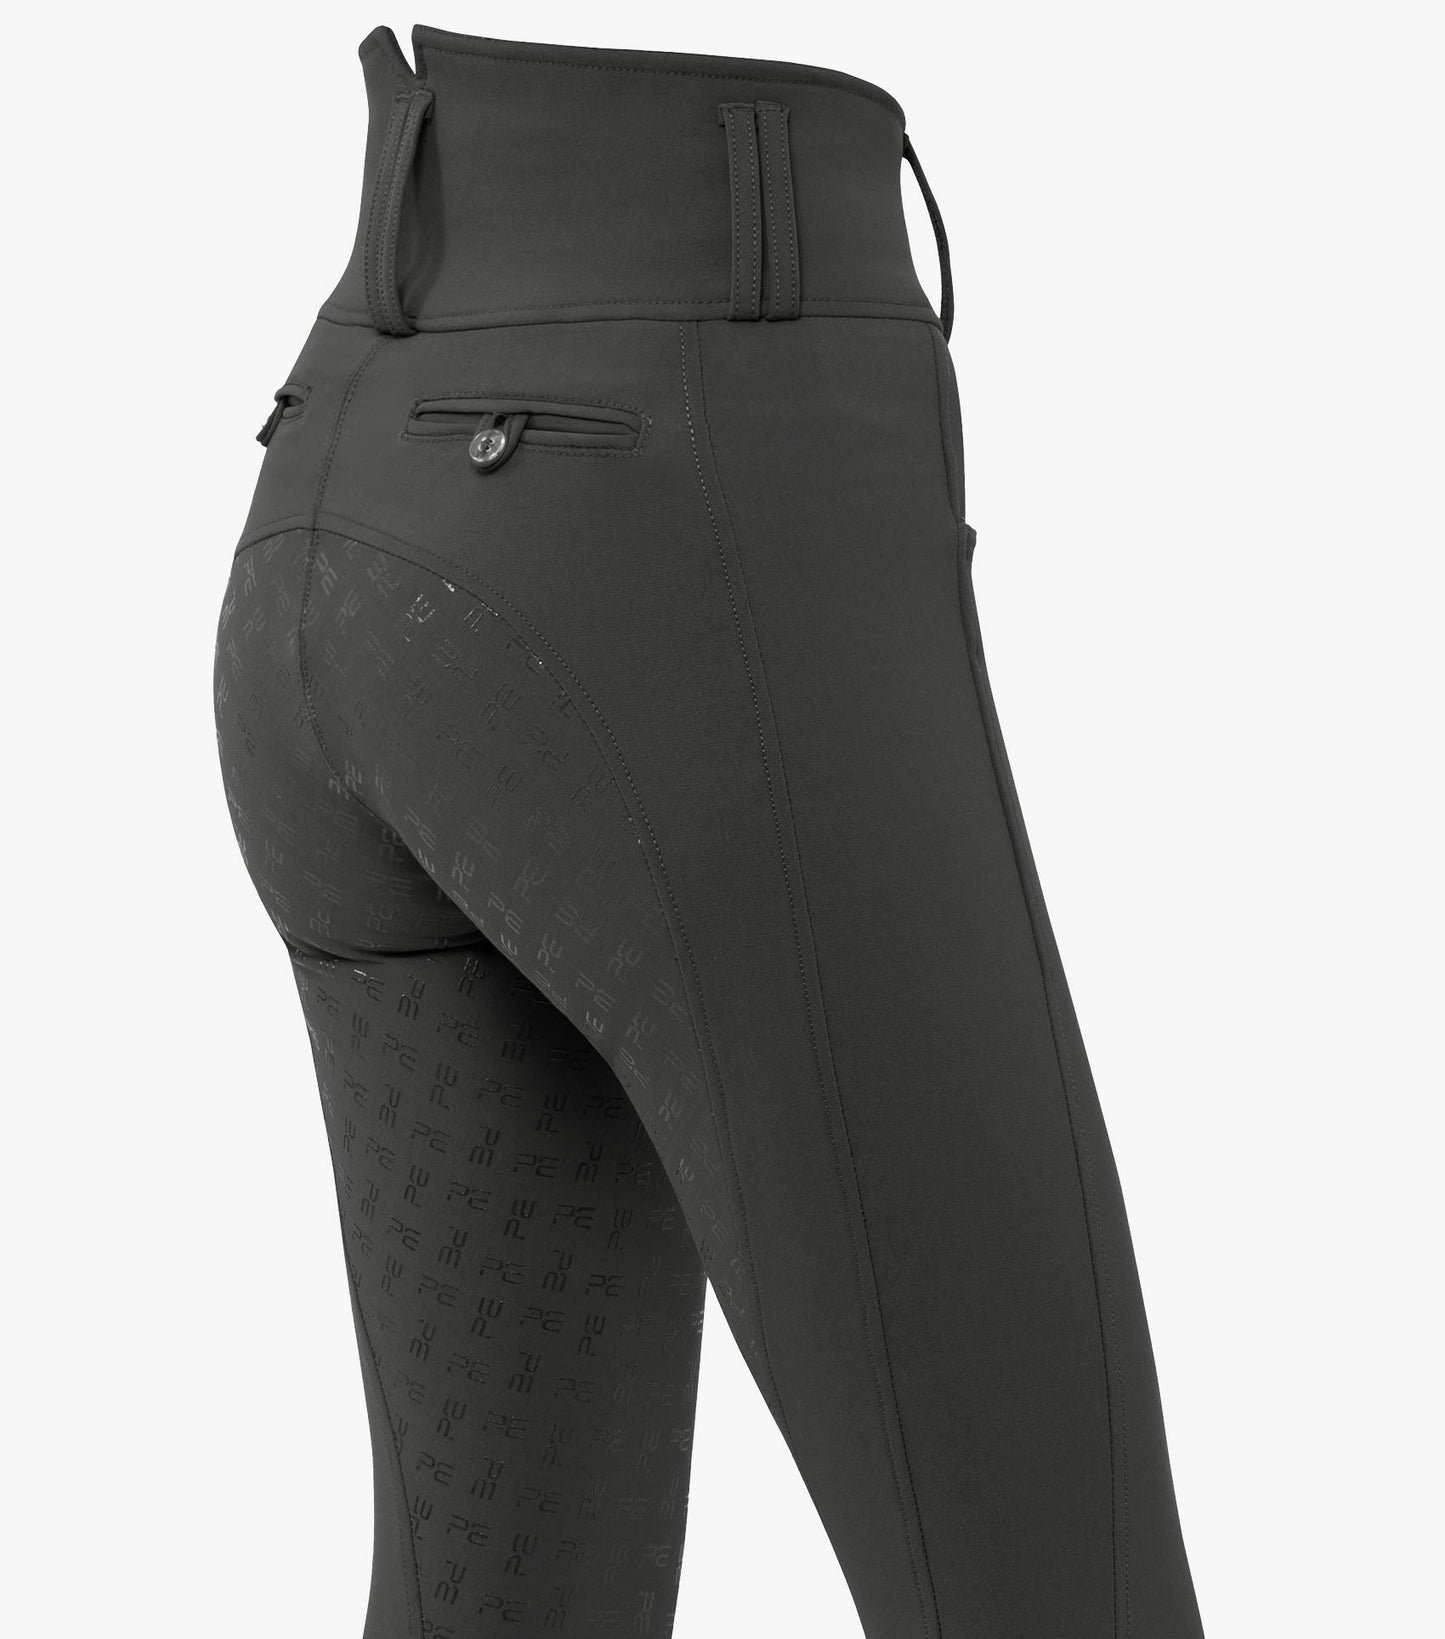 Premier Equine Coco II Ladies Gel Full Seat Riding Breeches, high waisted - grey and navy